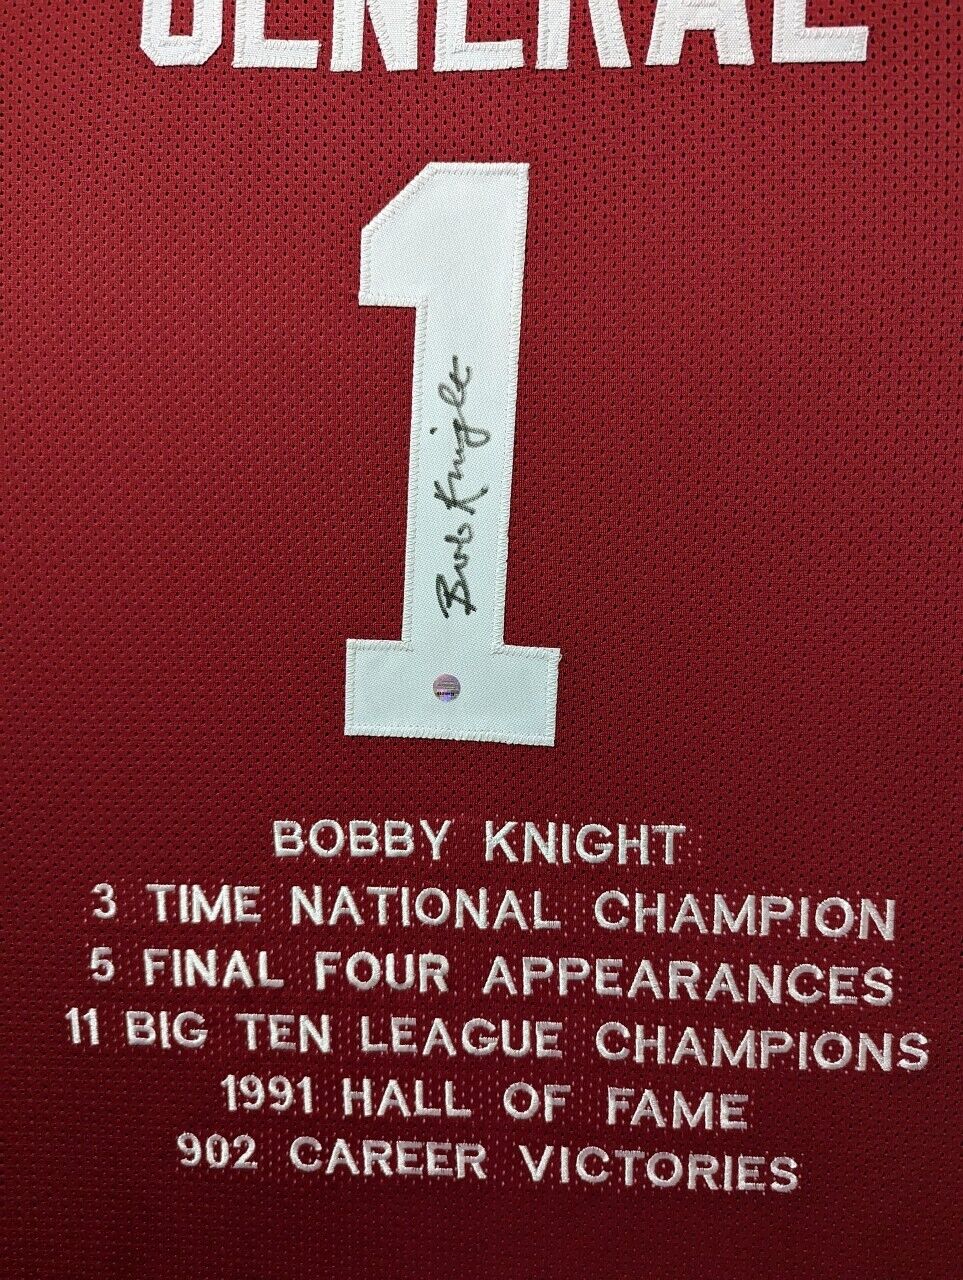 MVP Authentics Framed Indiana Hoosiers Bobby Knight Autographed Signed Stat Jersey Steiner Holo 765 sports jersey framing , jersey framing